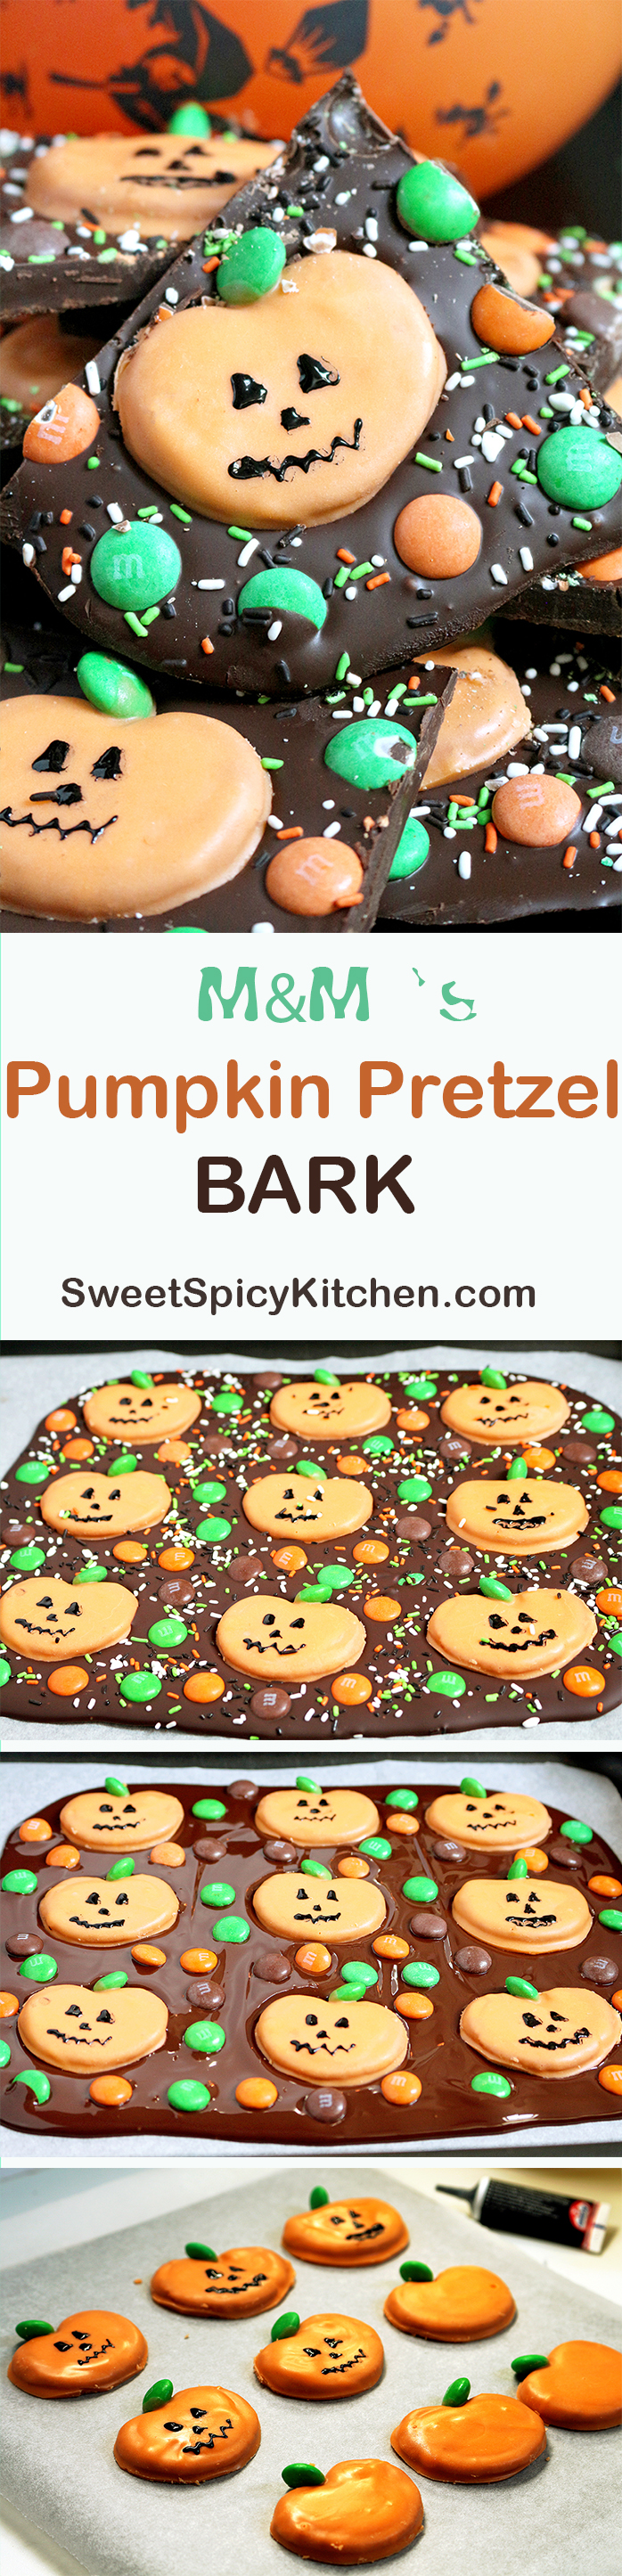 Here is a great recipe for Halloween – M&M’s Pumpkin Pretzel Bark – just perfect for this holiday. OMG Halloween… the party can start real soon.